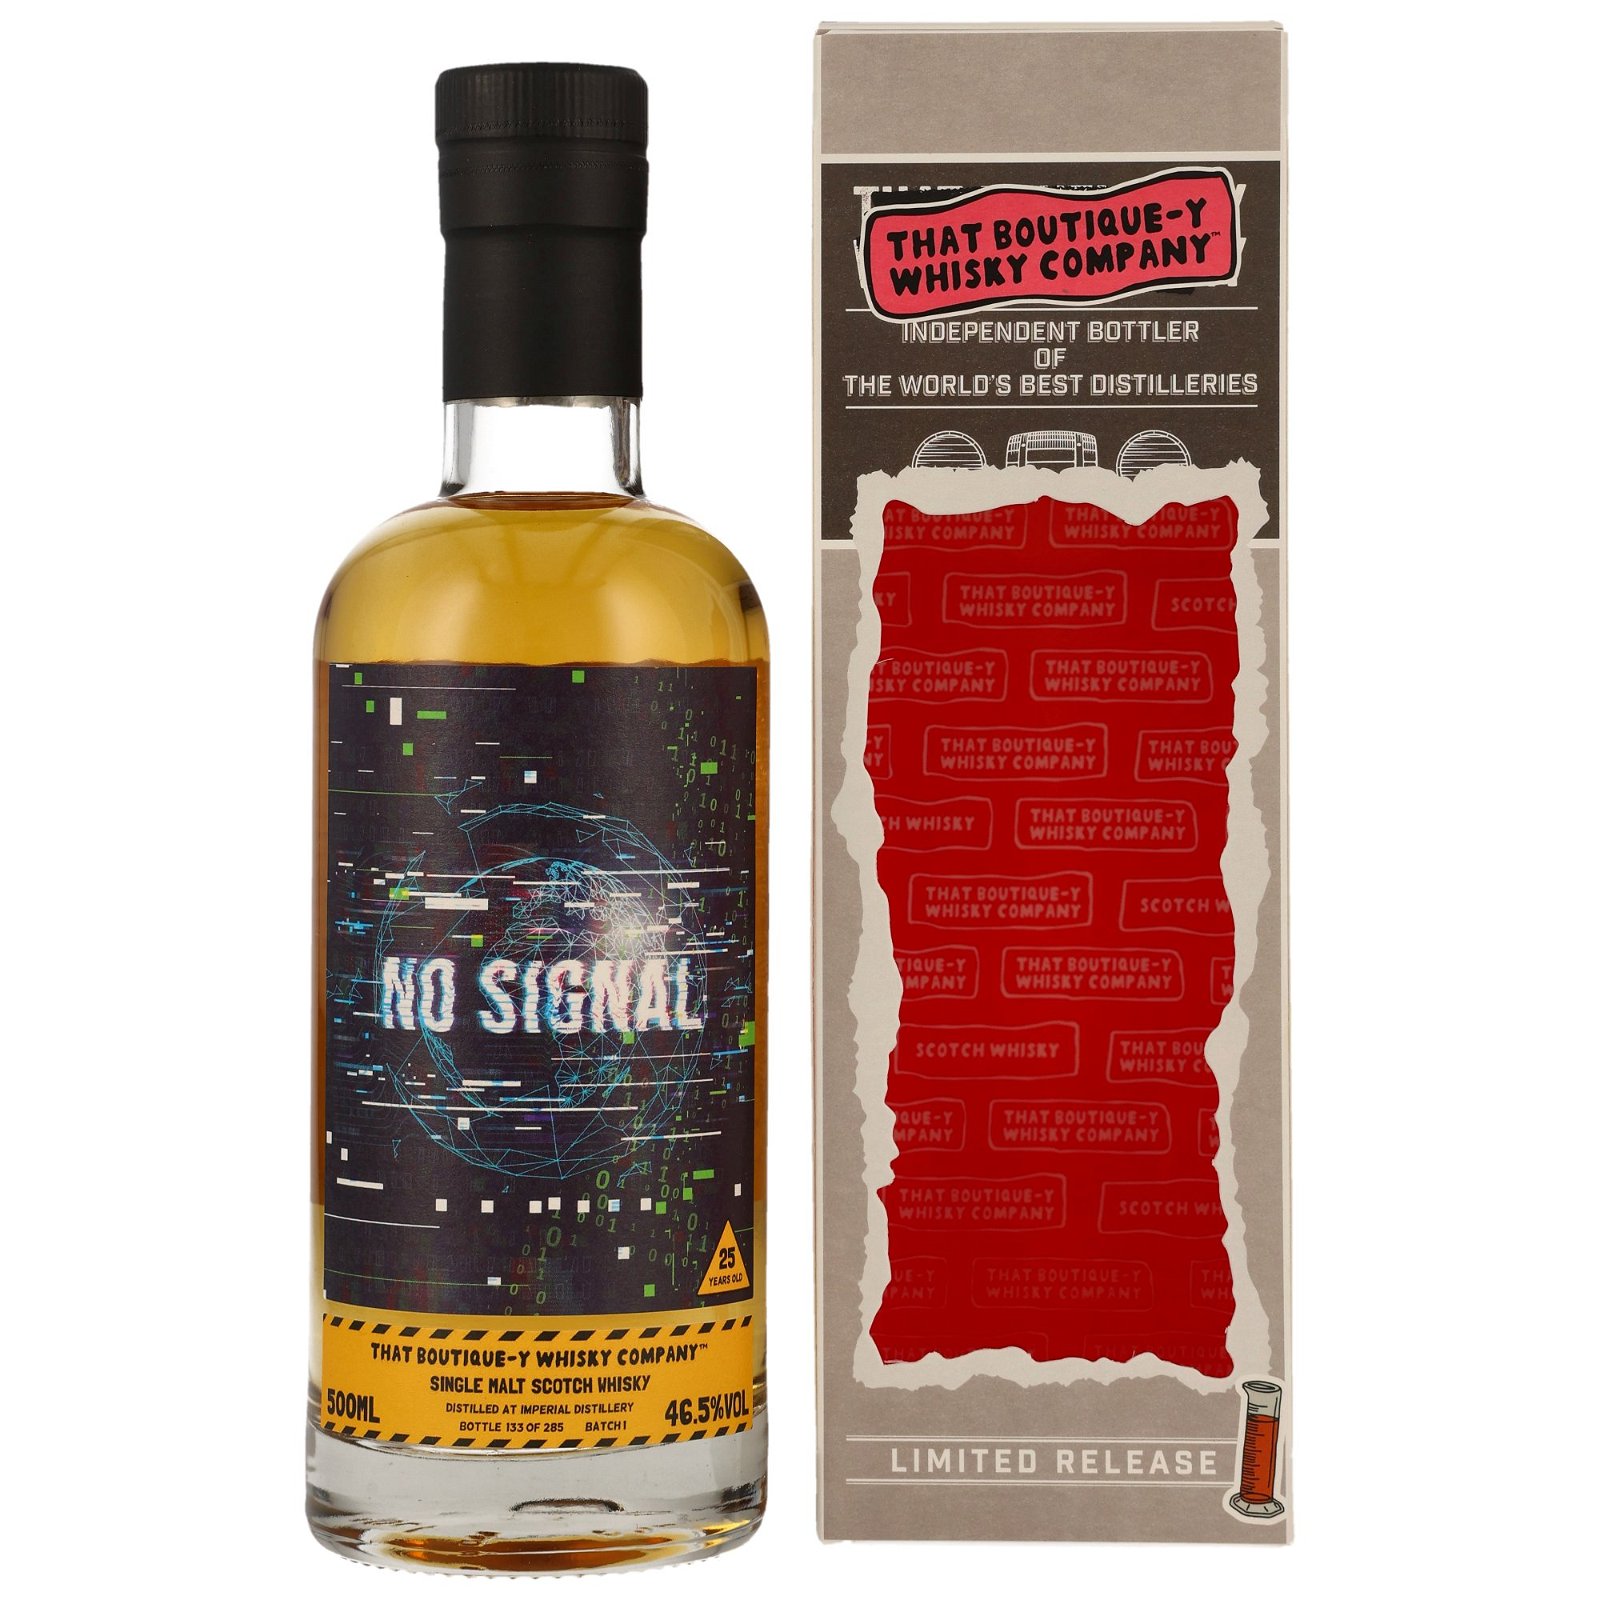 Imperial 25 Jahre No Signal Batch 1 (That Boutique-y Whisky Company)